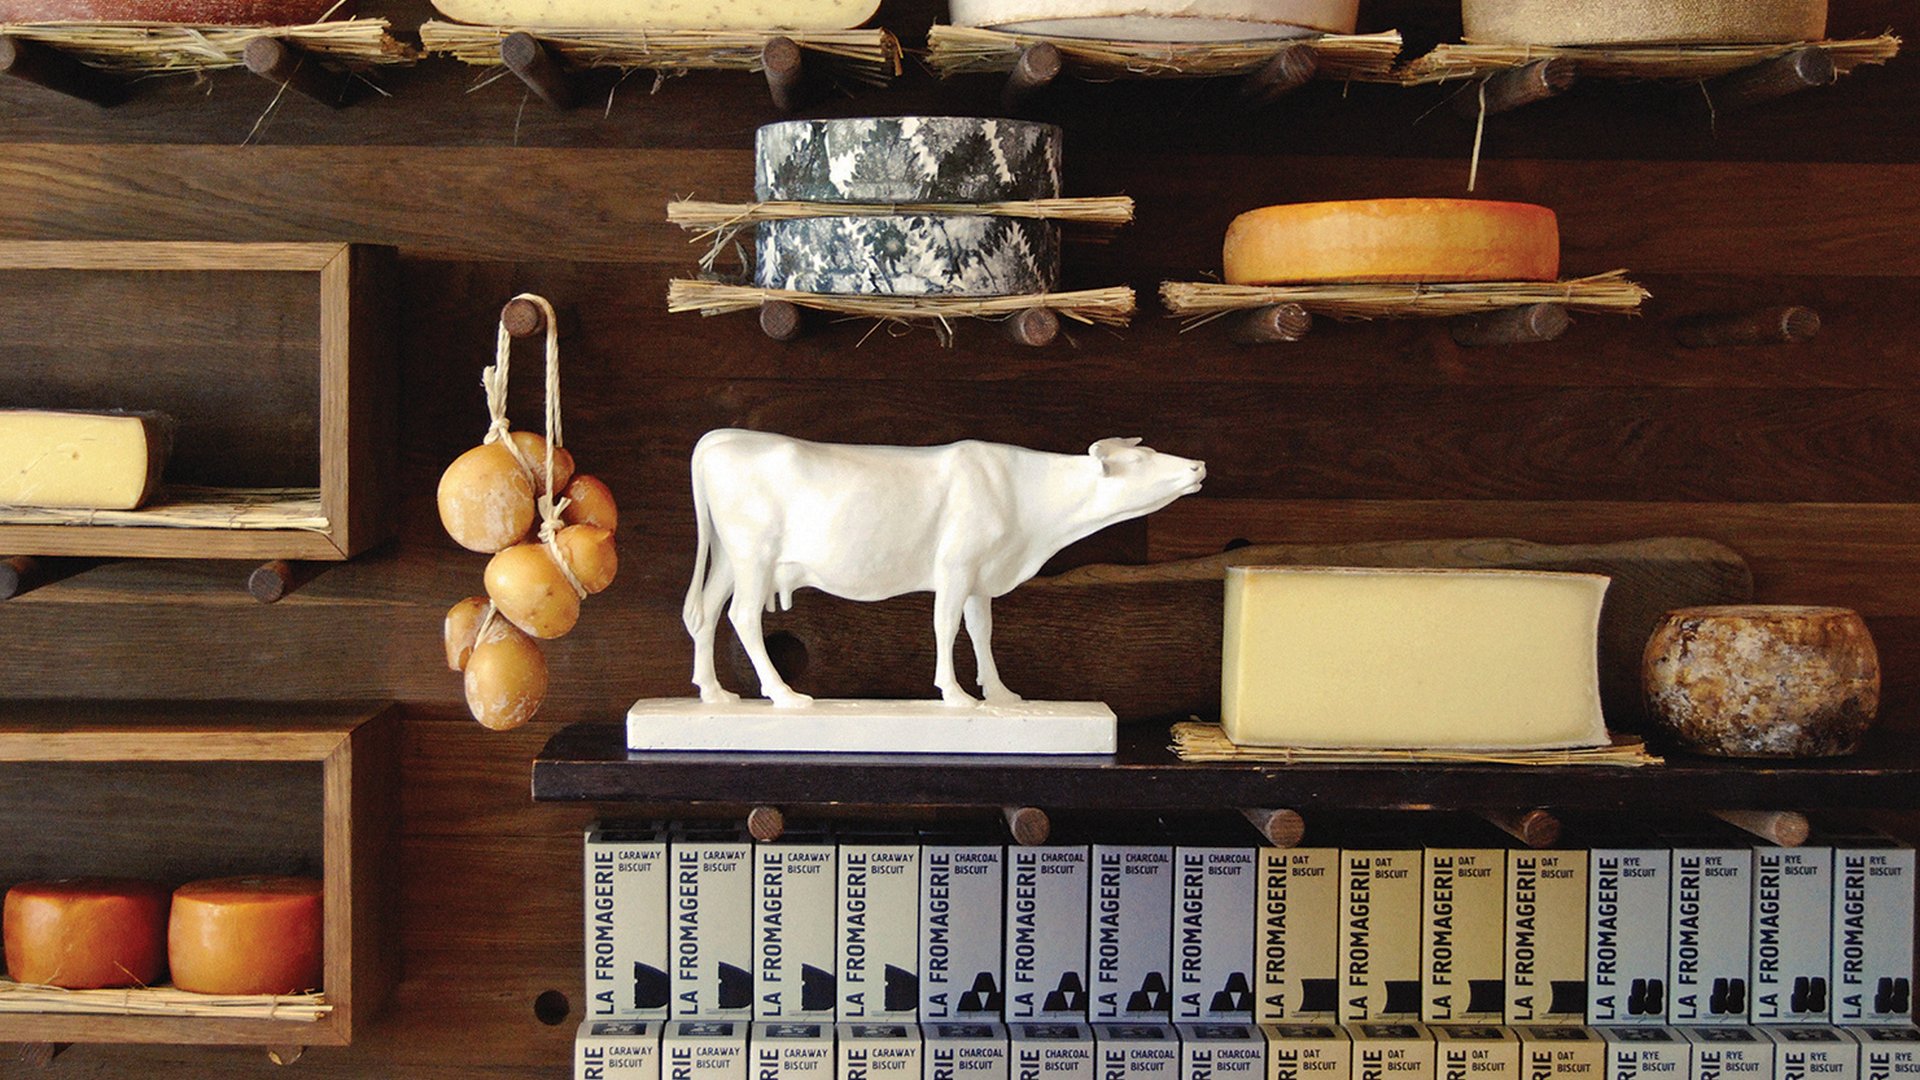 London's exquisite cheese shops